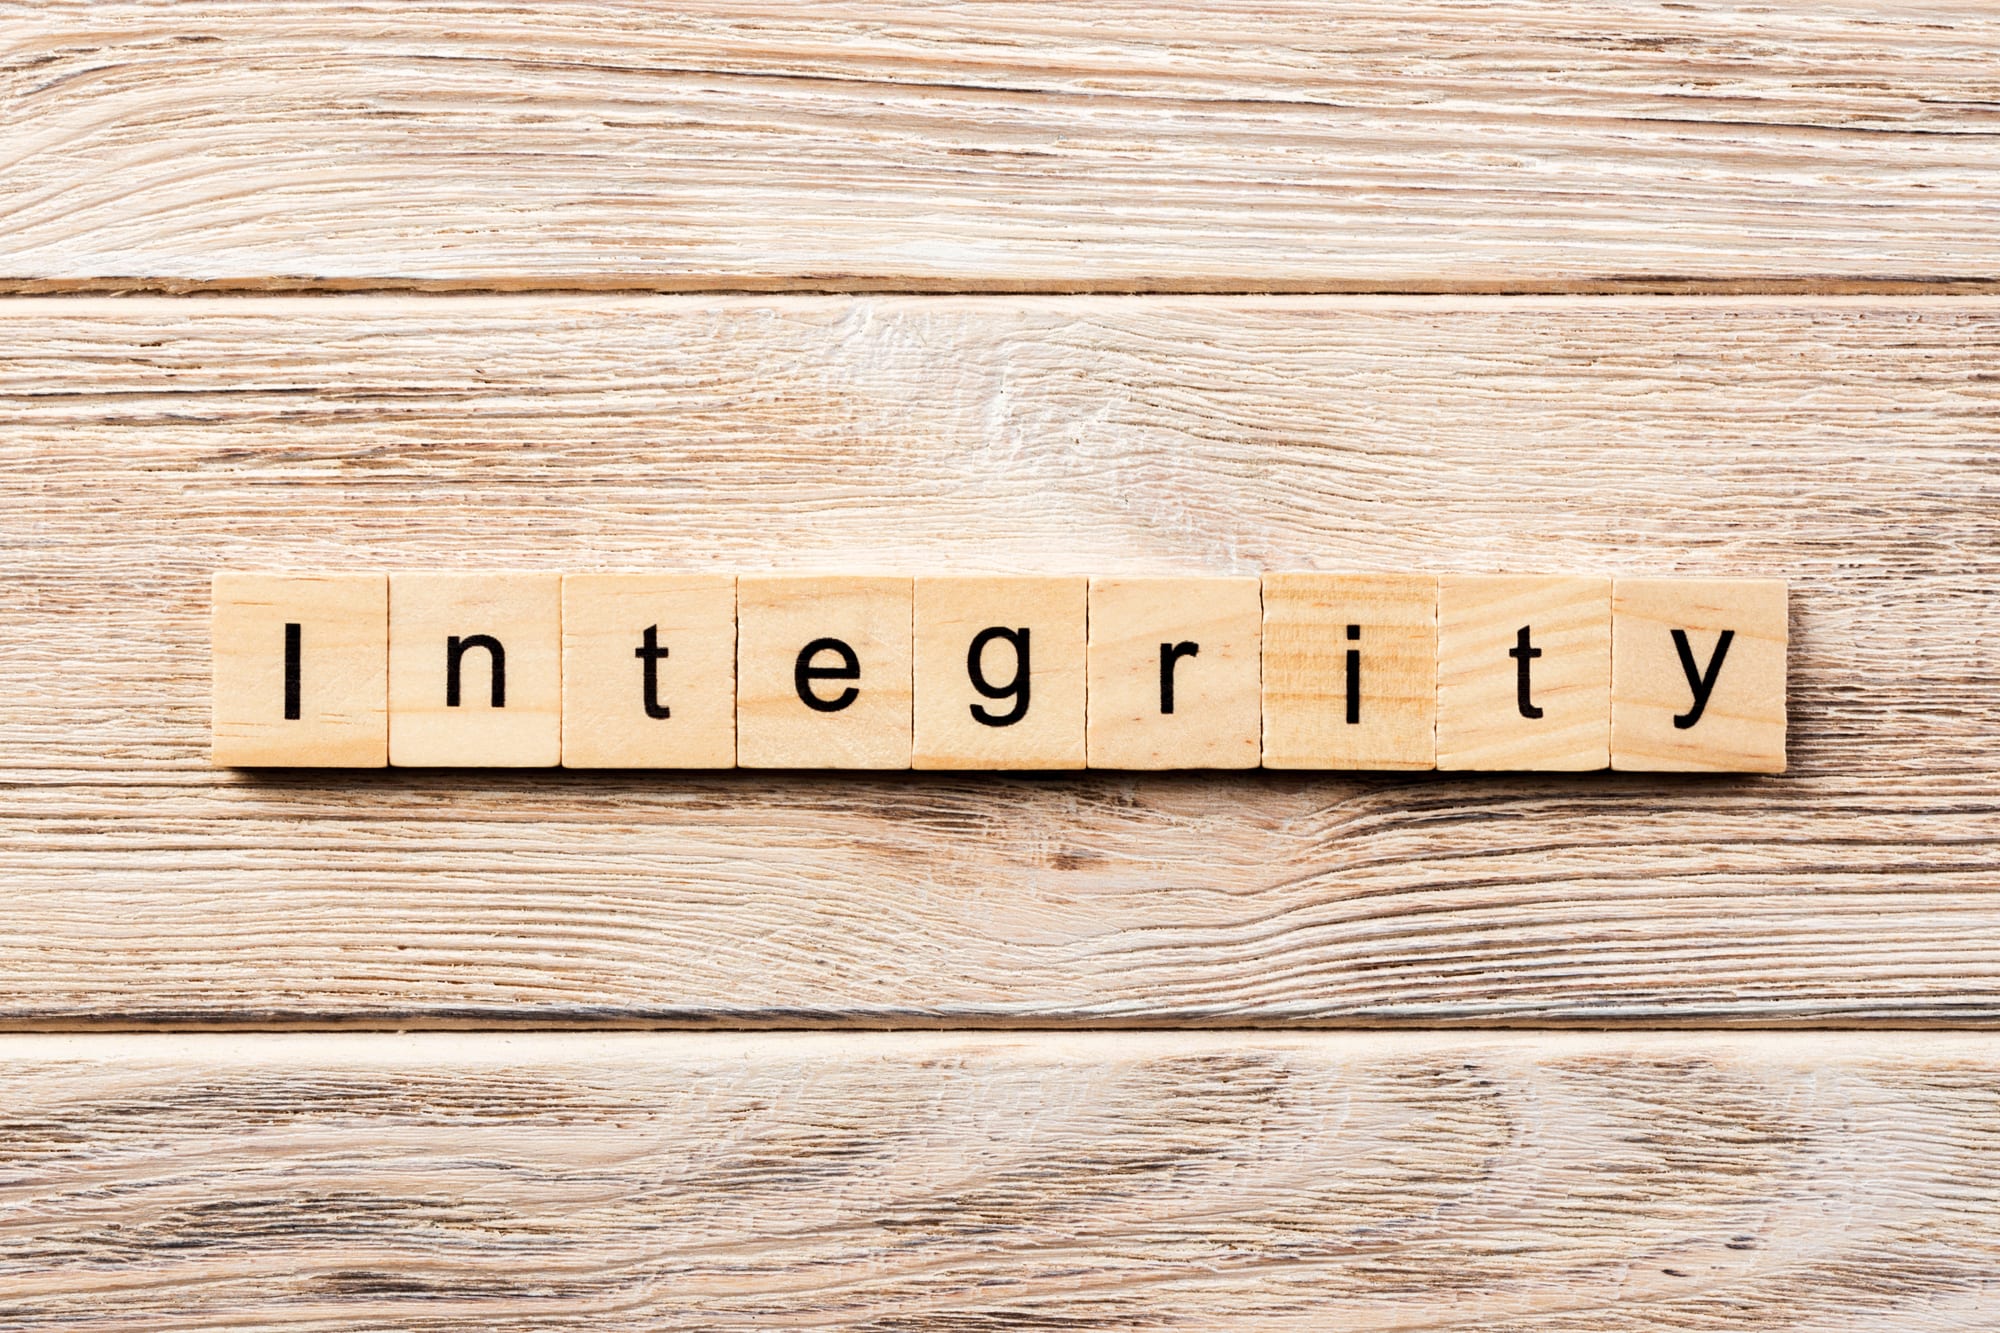 Scrabble tile spelling out the word "Integrity"